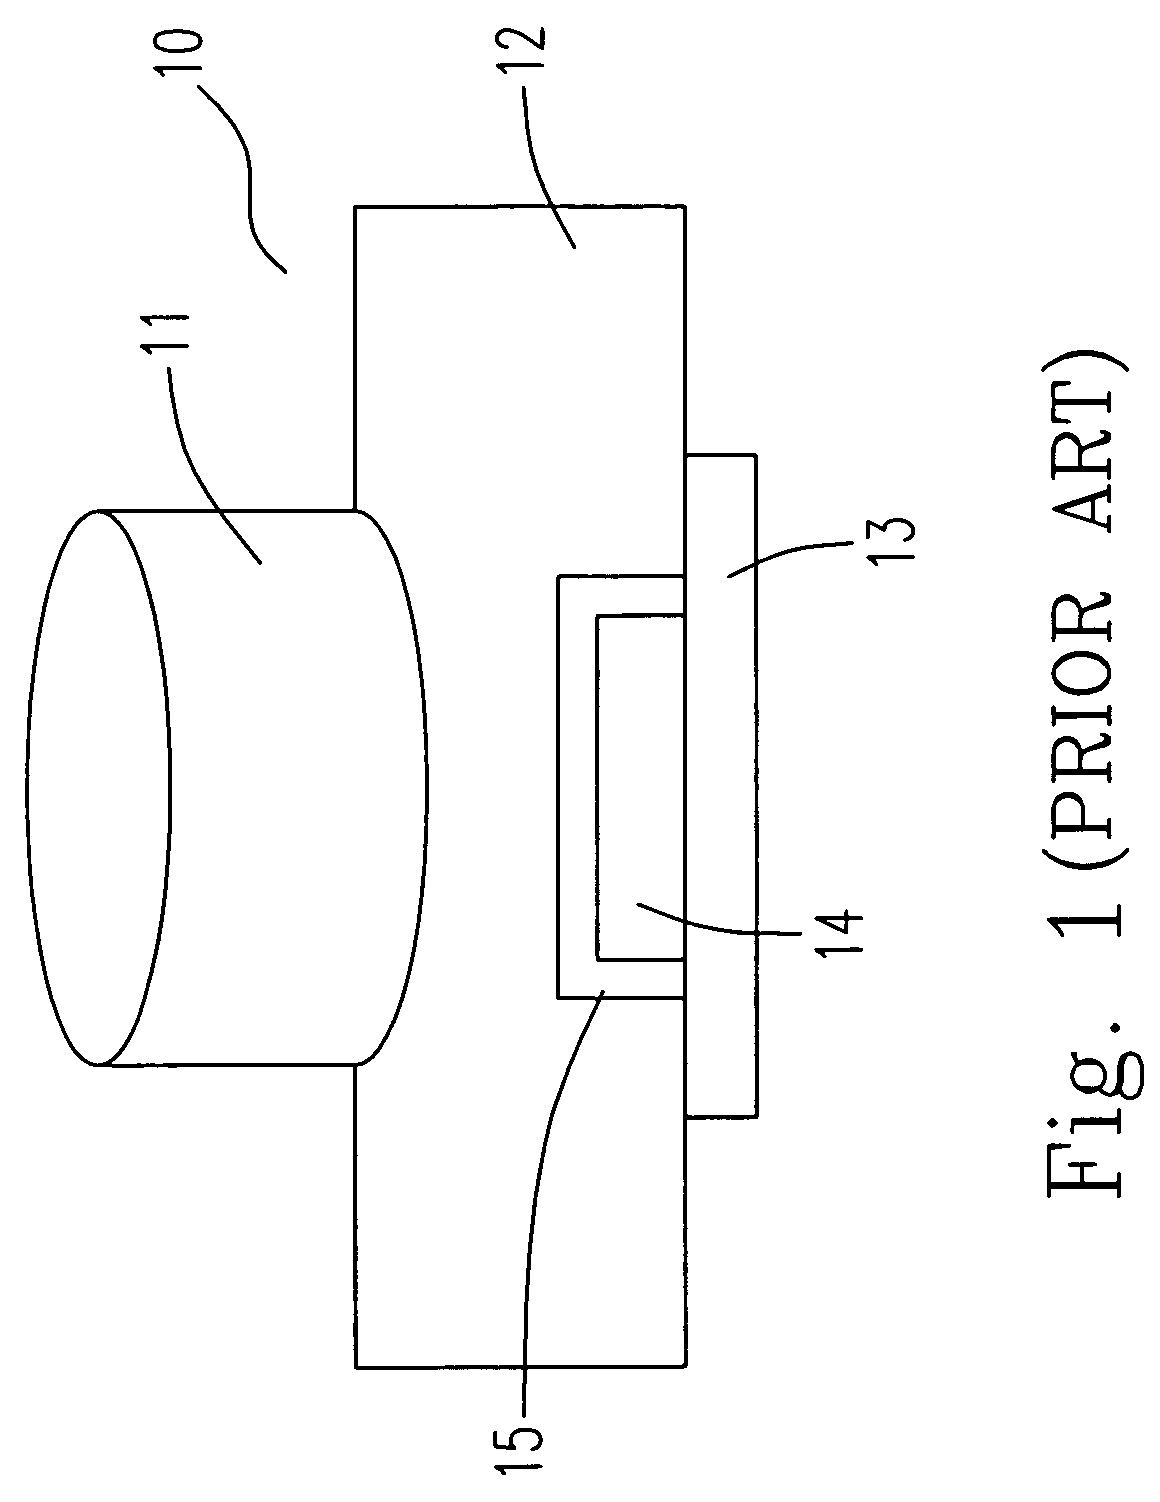 Lens assembly having focal length adjustable by a spacer for obtaining an image of an object